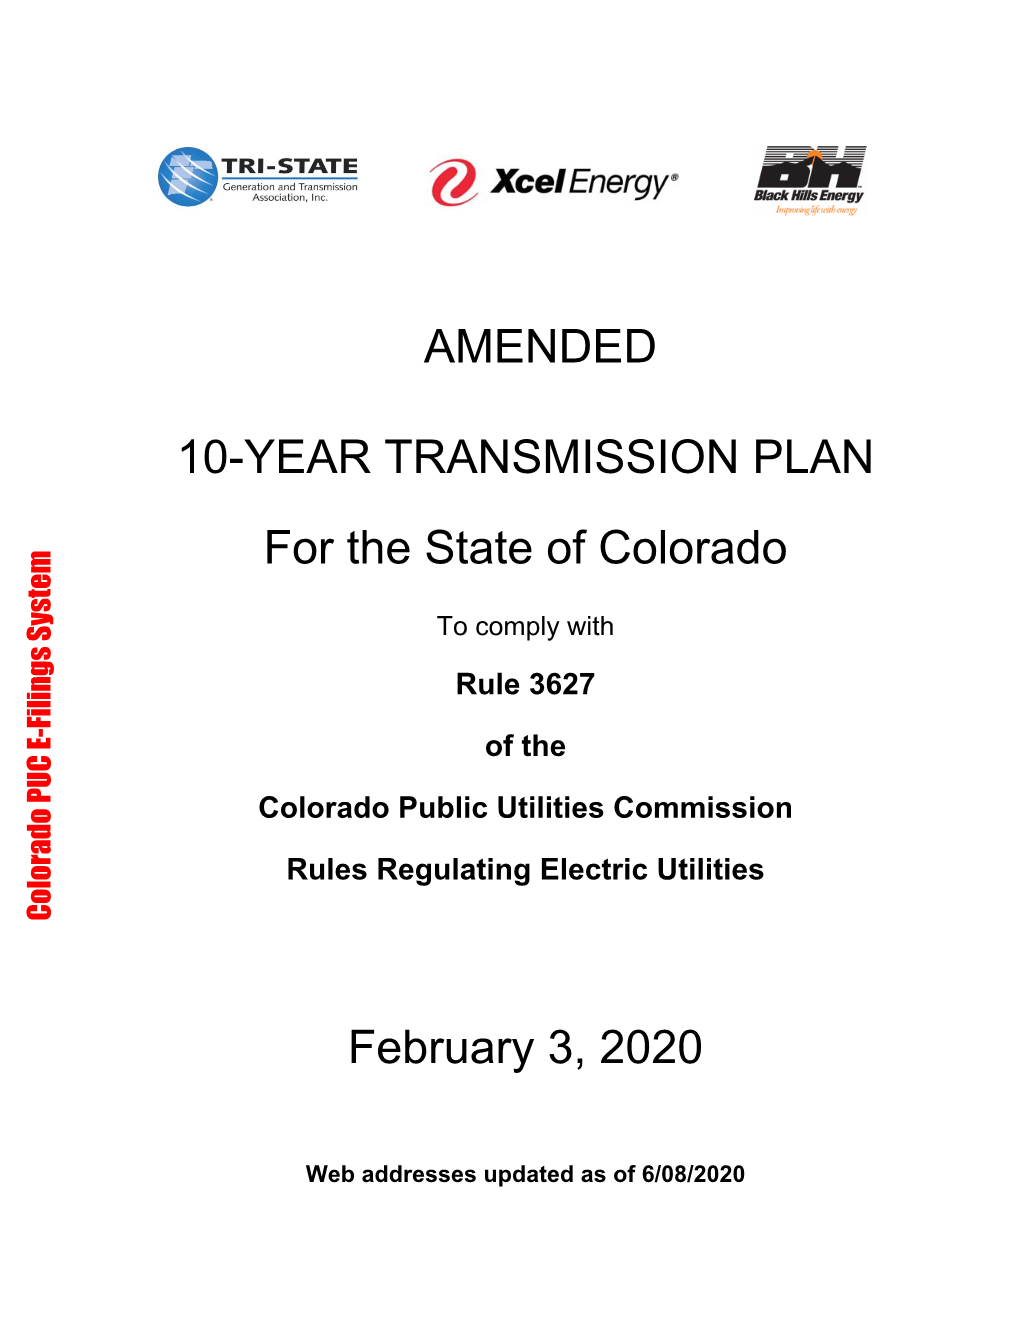 AMENDED 10-YEAR TRANSMISSION PLAN for the State of Colorado